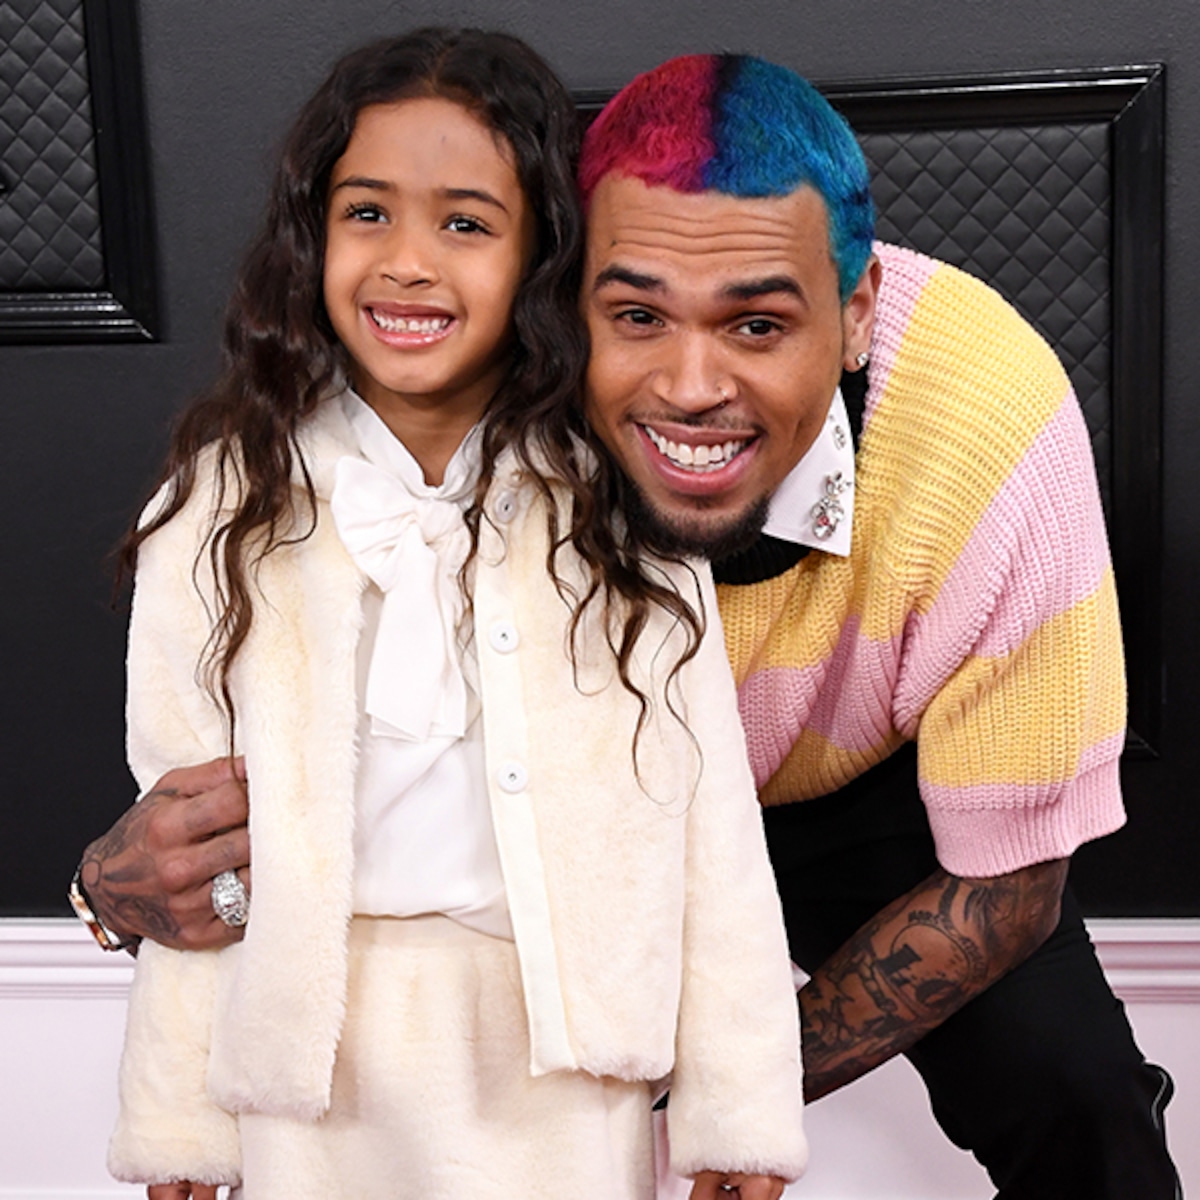 Chris Brown Celebrates Daughter Royalty's 6th Birthday With a Surprise